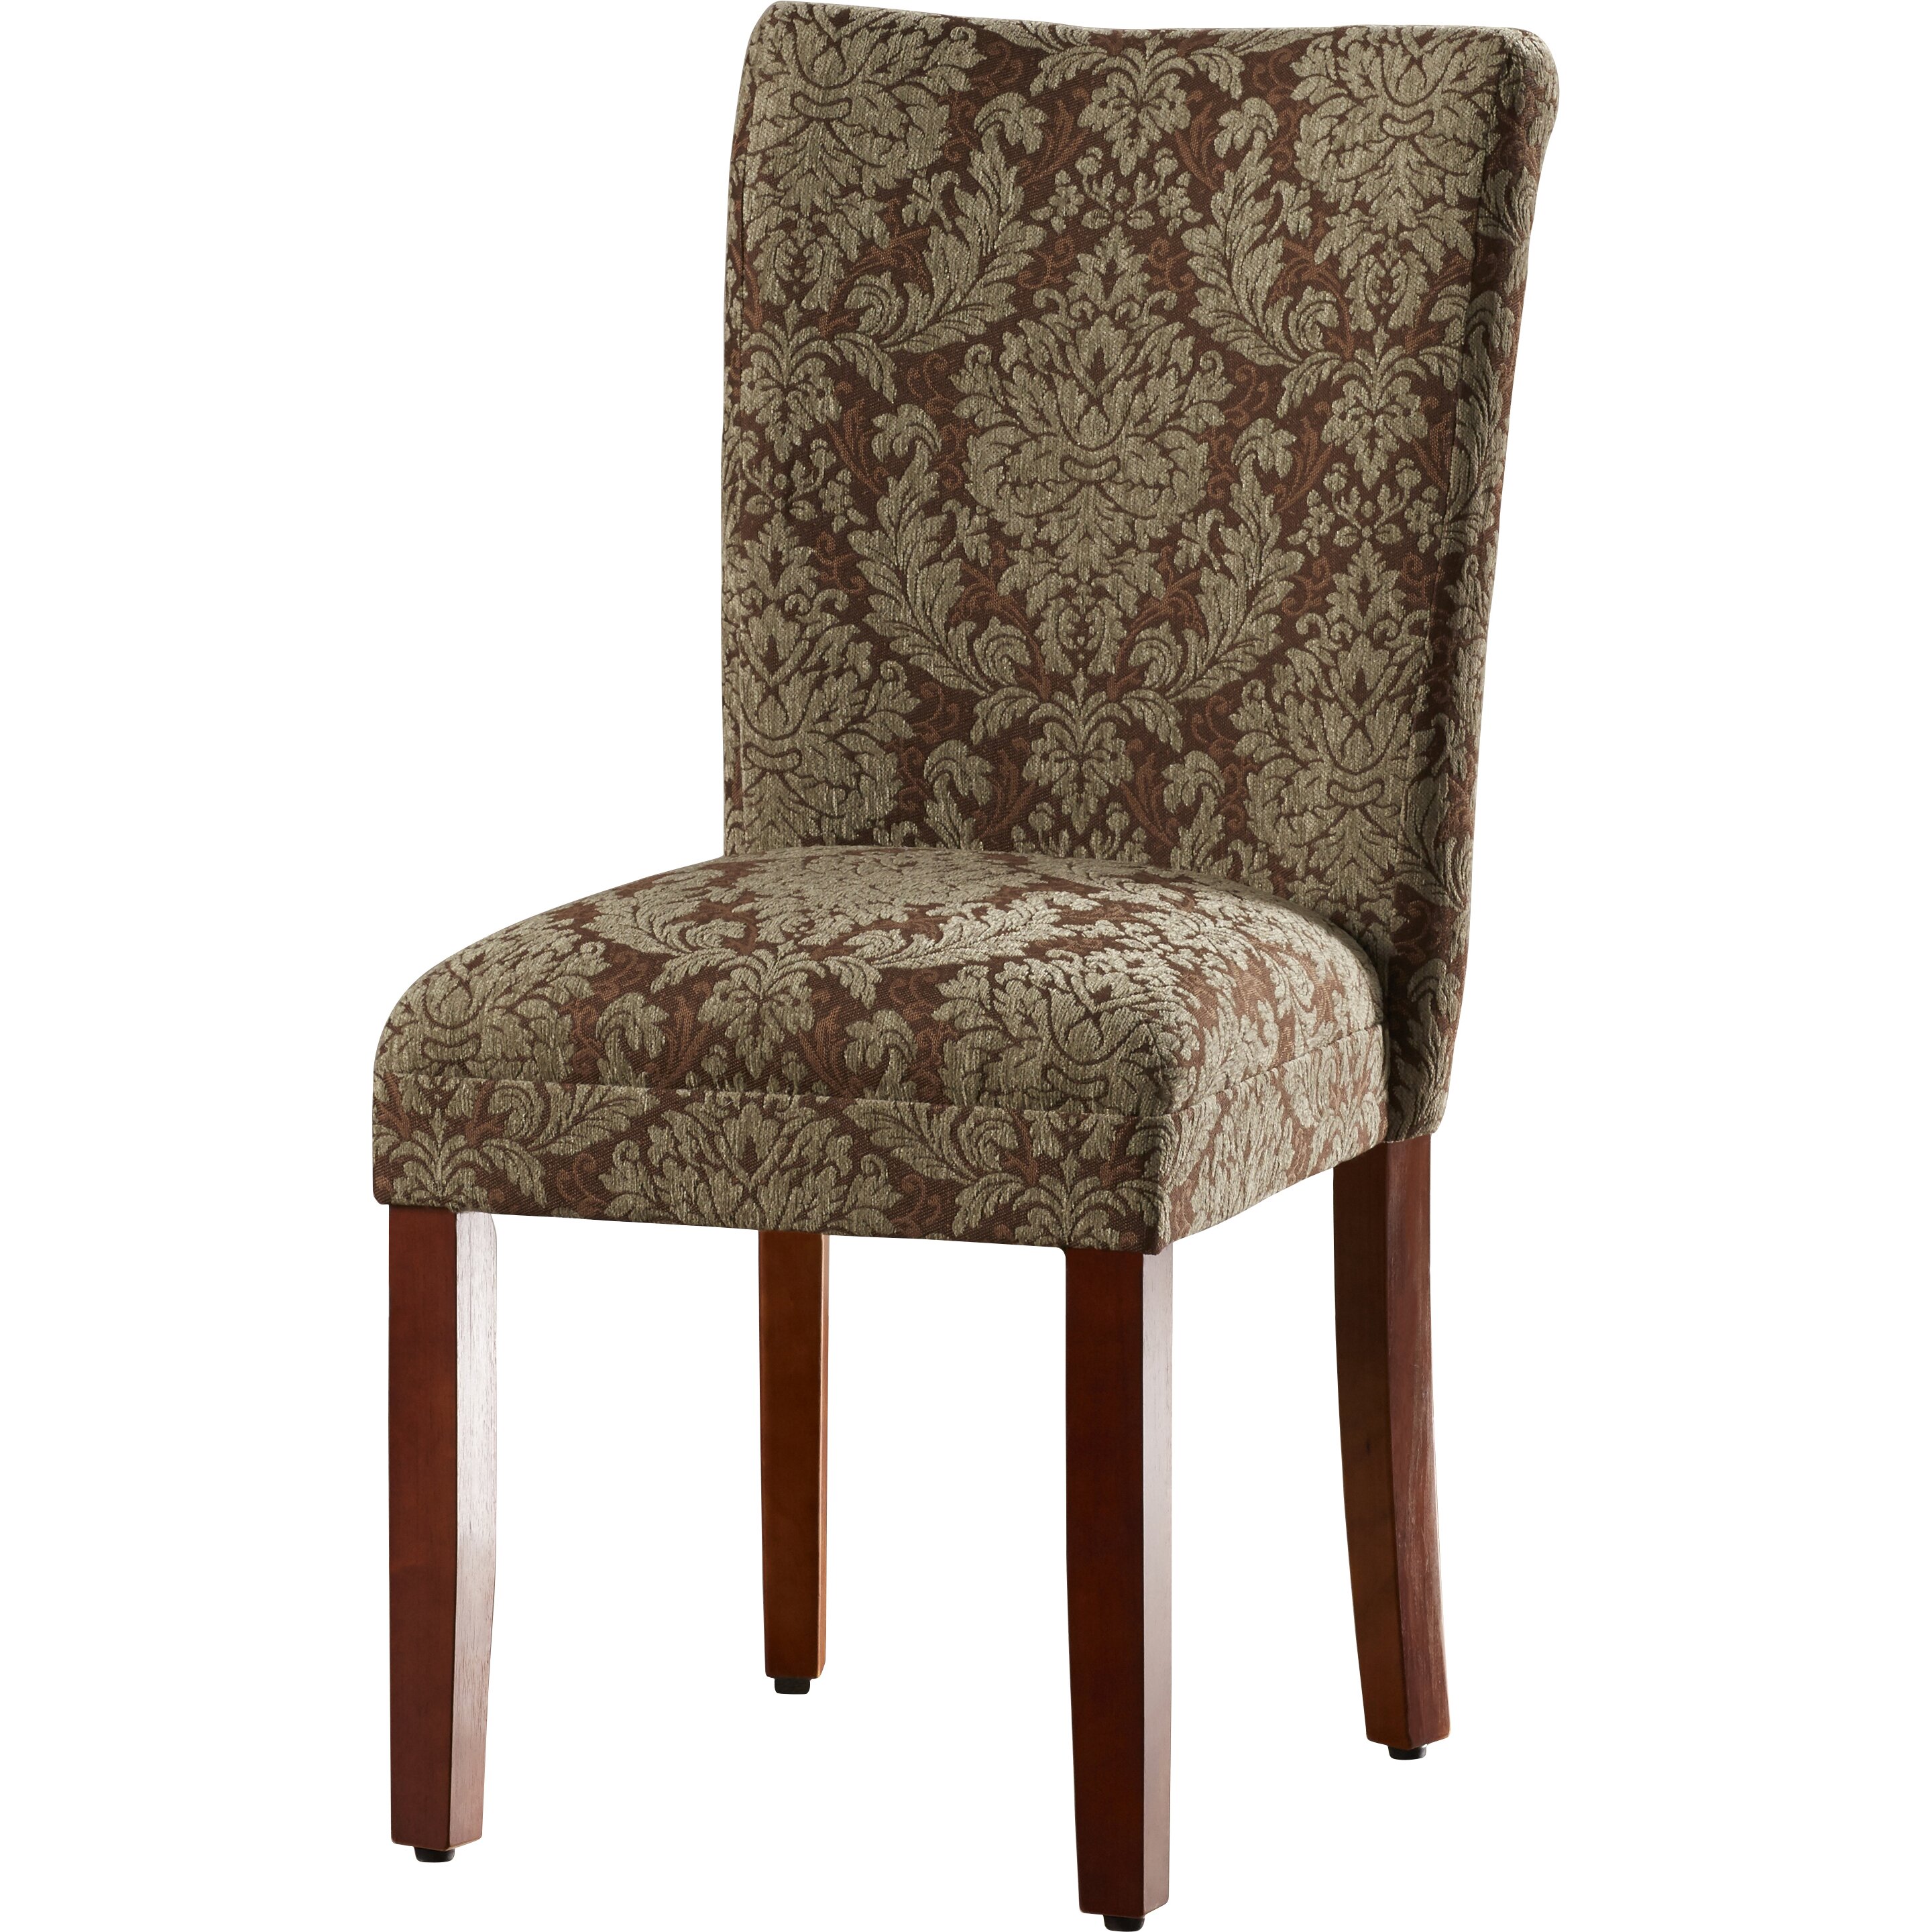 Three Posts Hazelwood Upholstered Damask Parsons Chair & Reviews | Wayfair